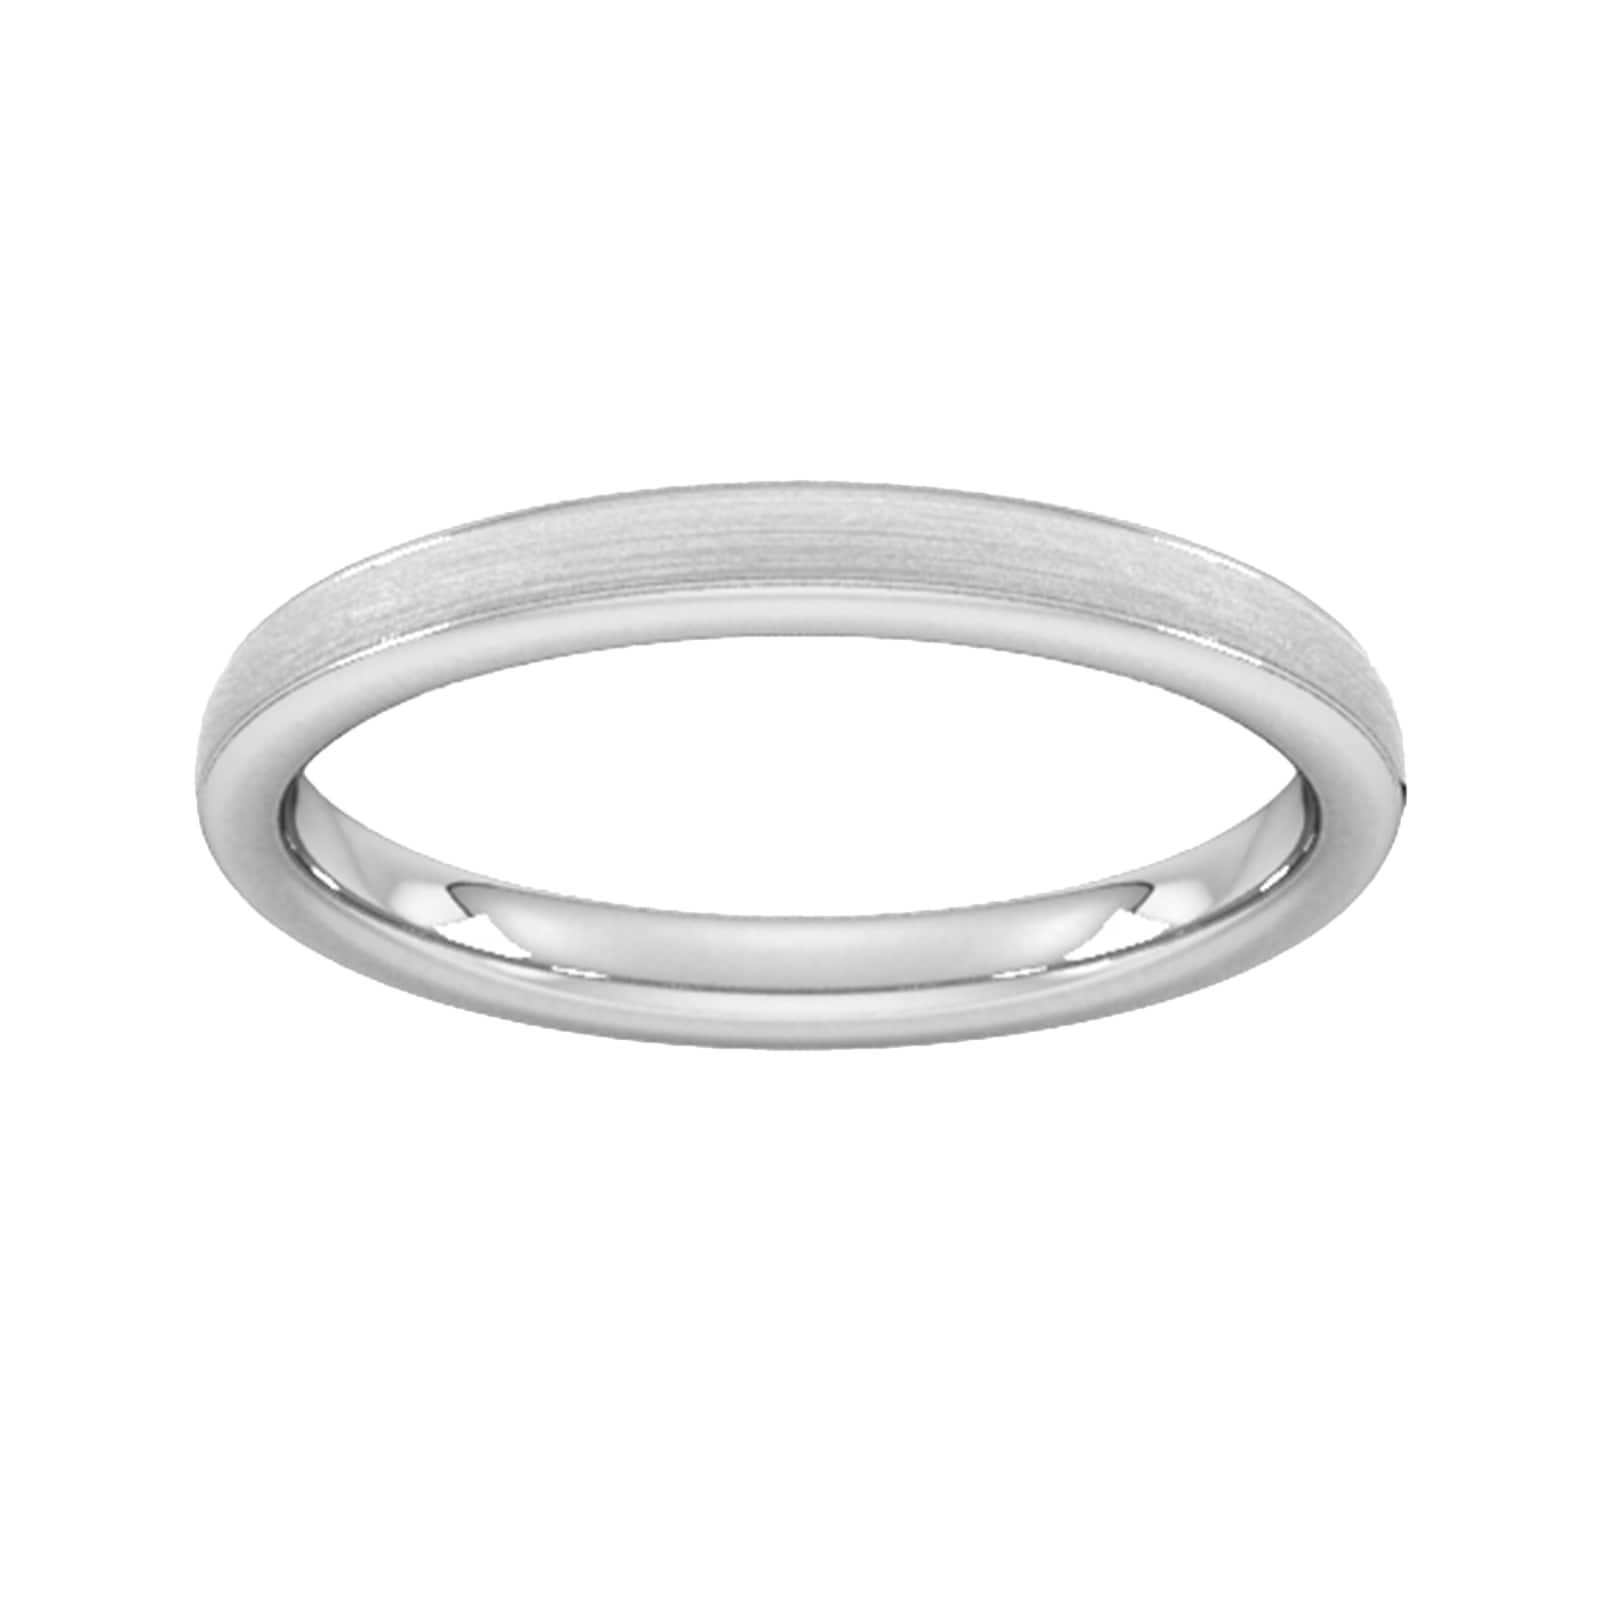 2.5mm Slight Court Extra Heavy Matt Centre With Grooves Wedding Ring In 9 Carat White Gold - Ring Size I